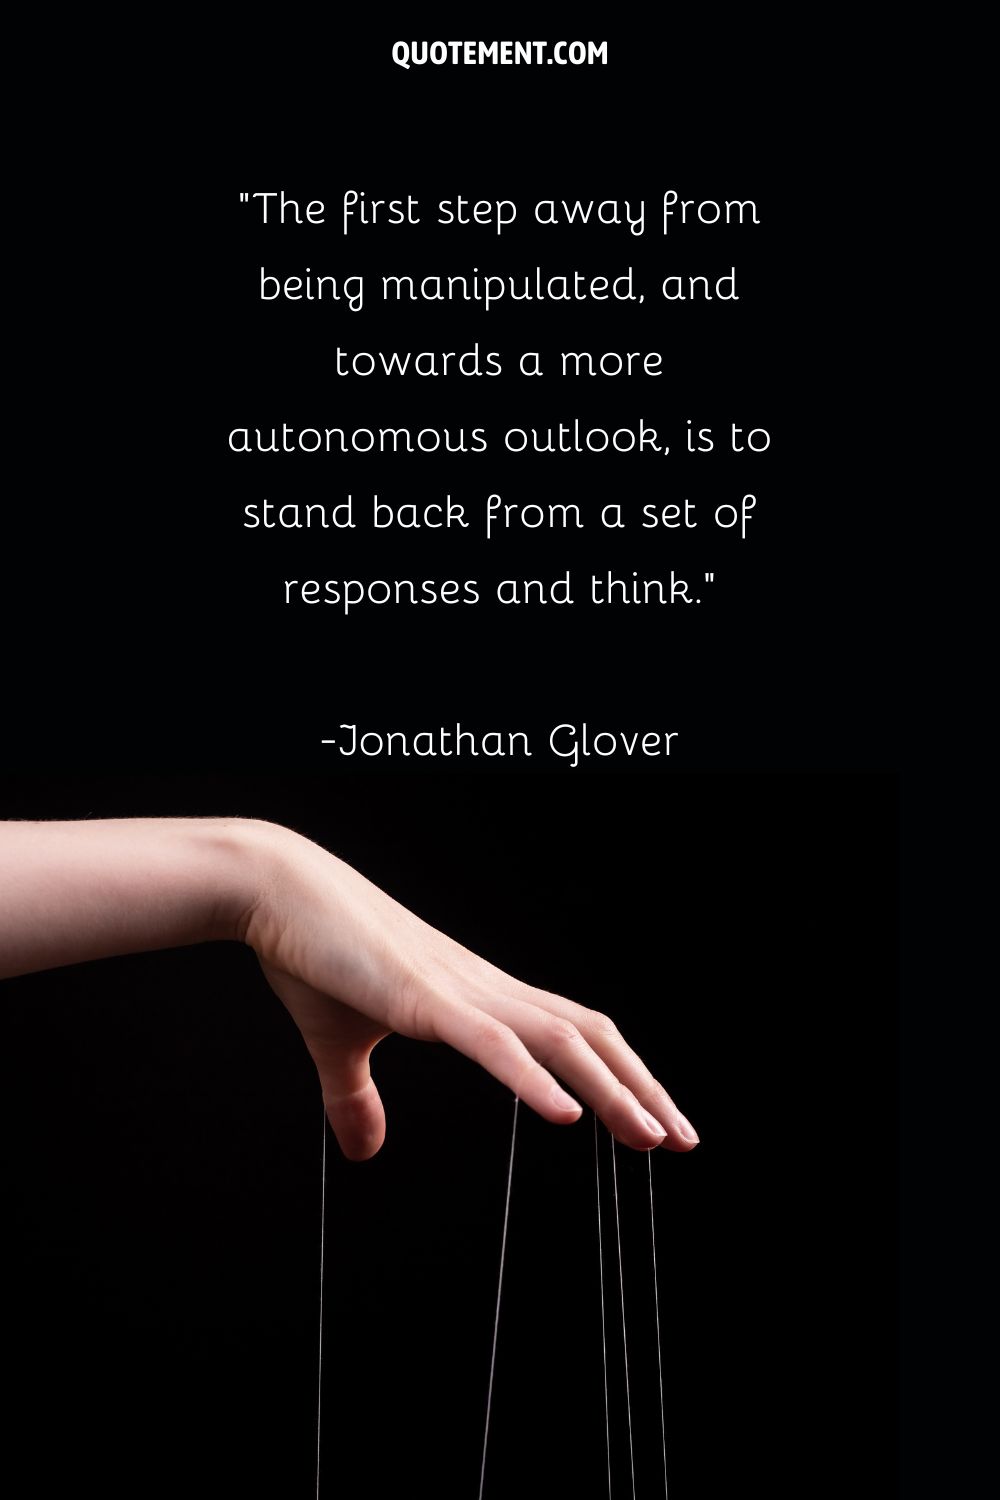 hand with strings image representing quote on avoiding being manipulated